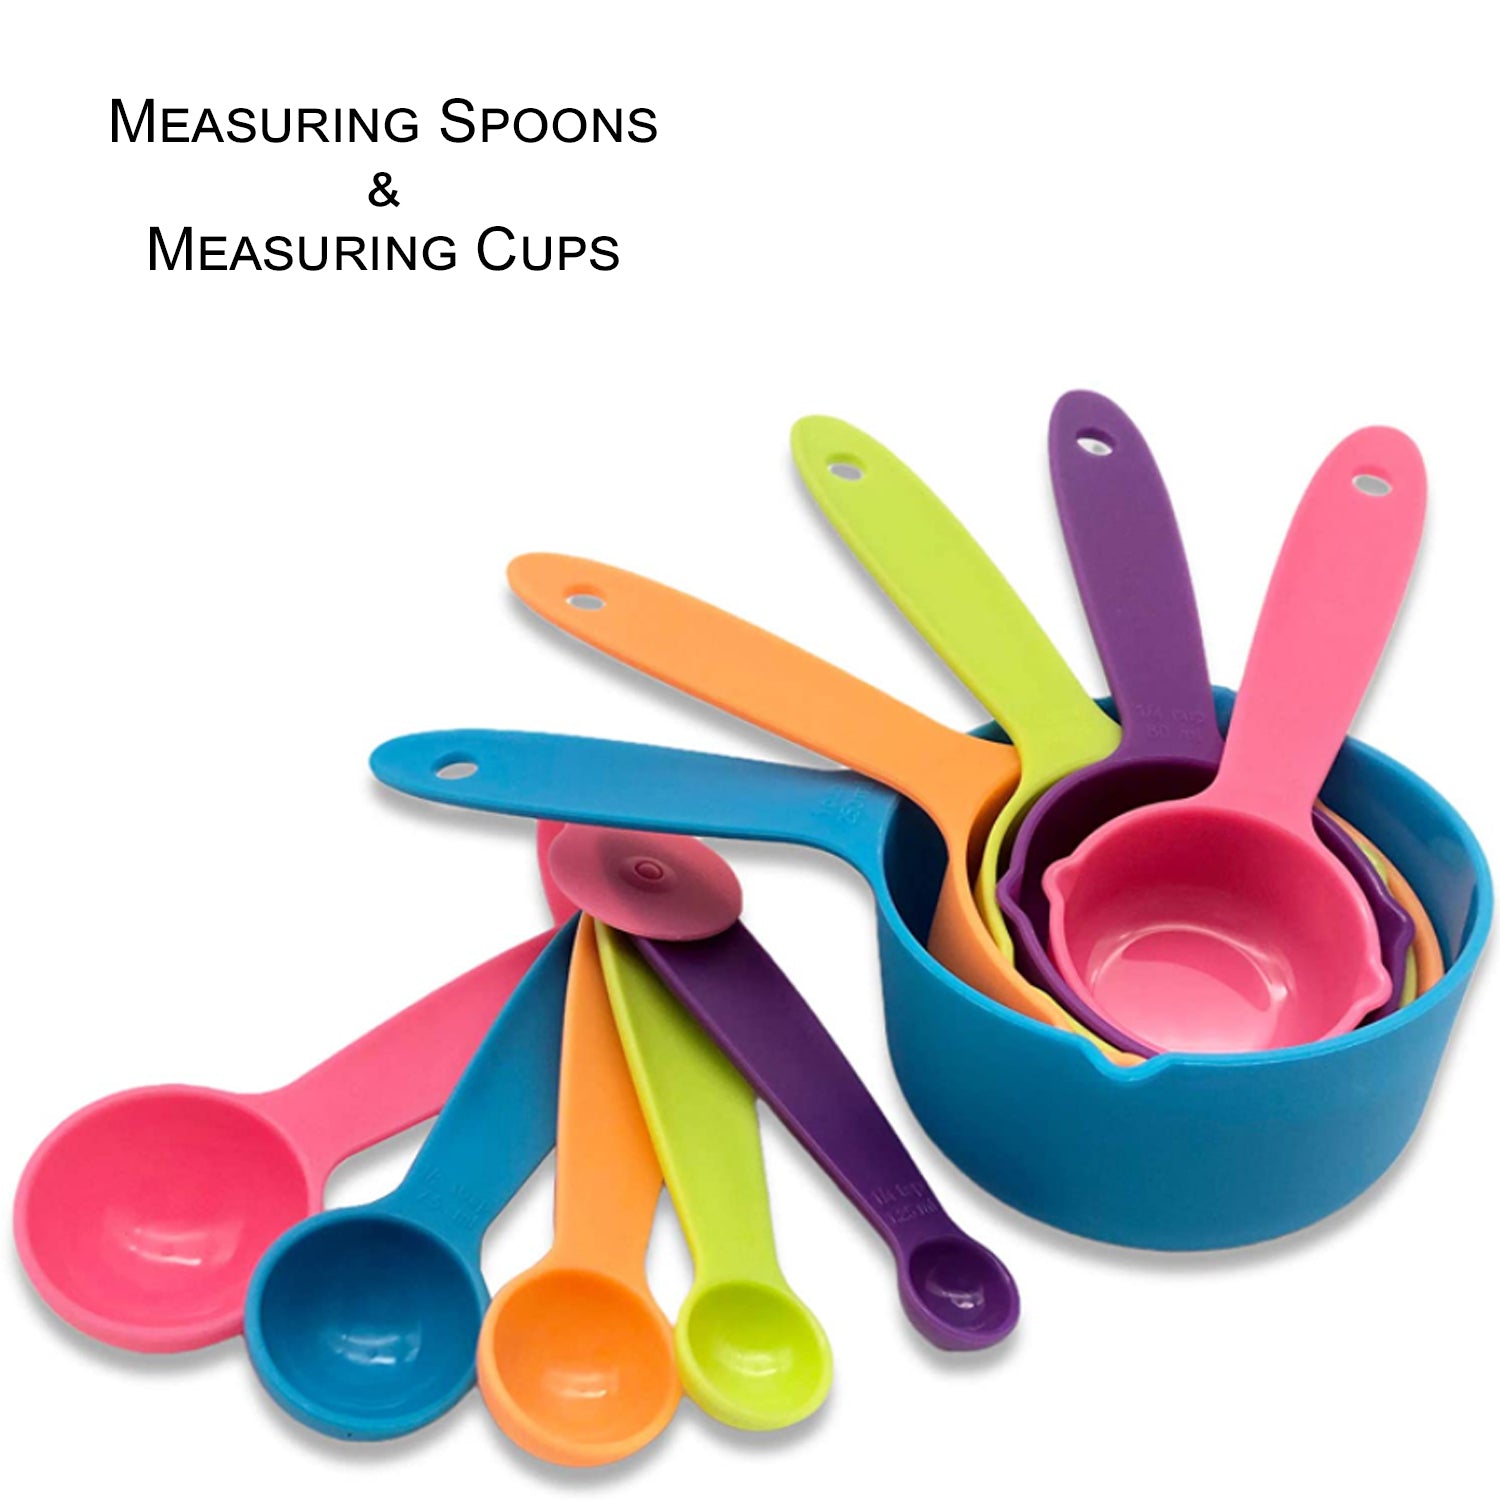 Measuring Cups & Spoons - The Food Balance